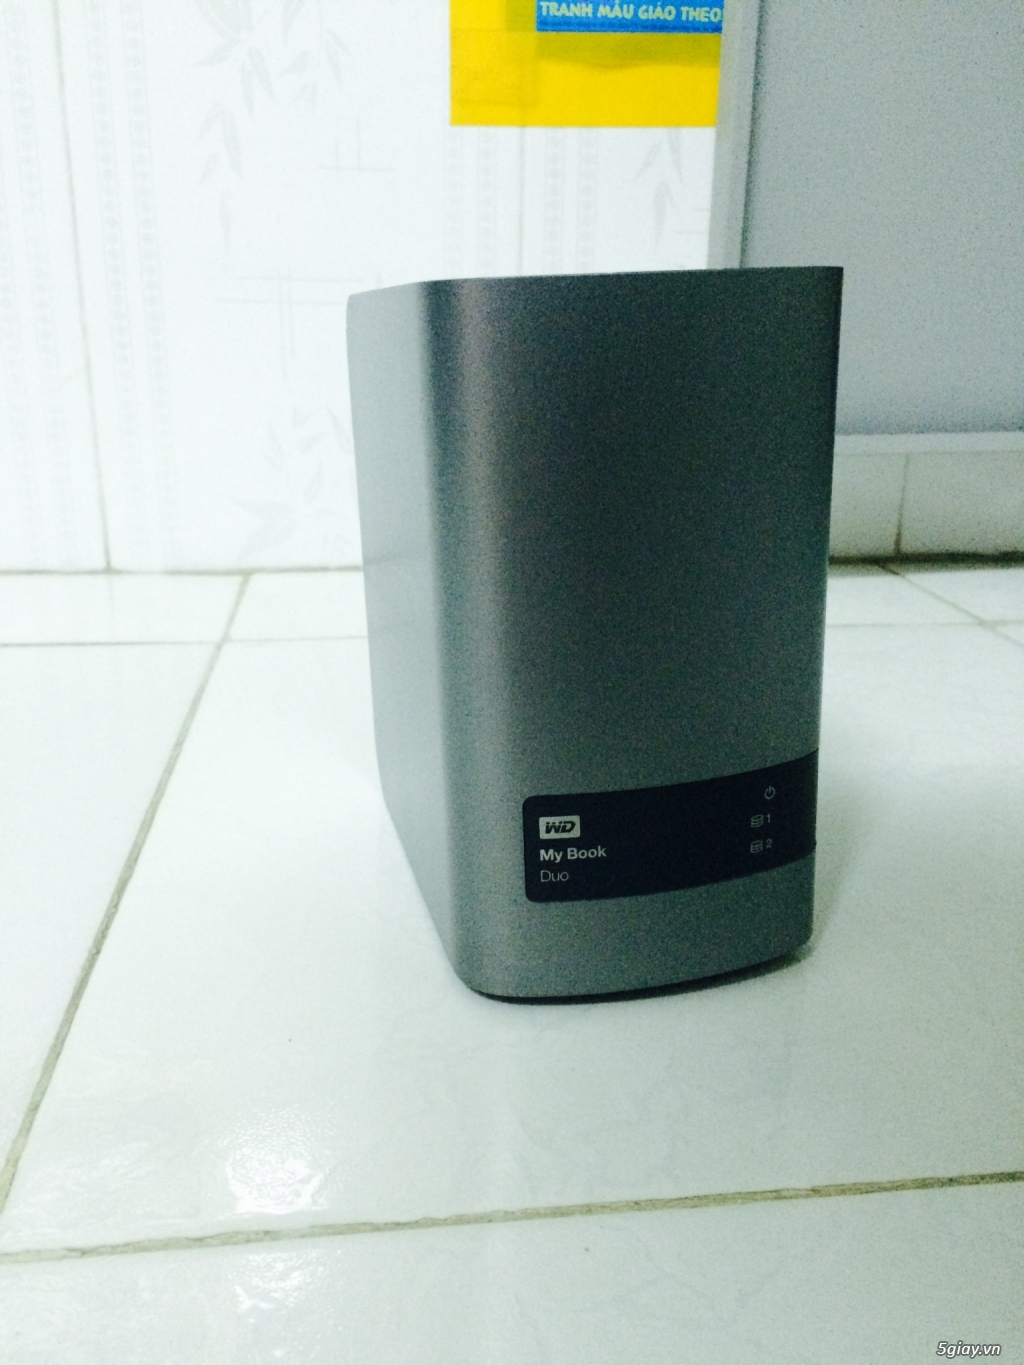 Ổ cứng My book Duo 6TB